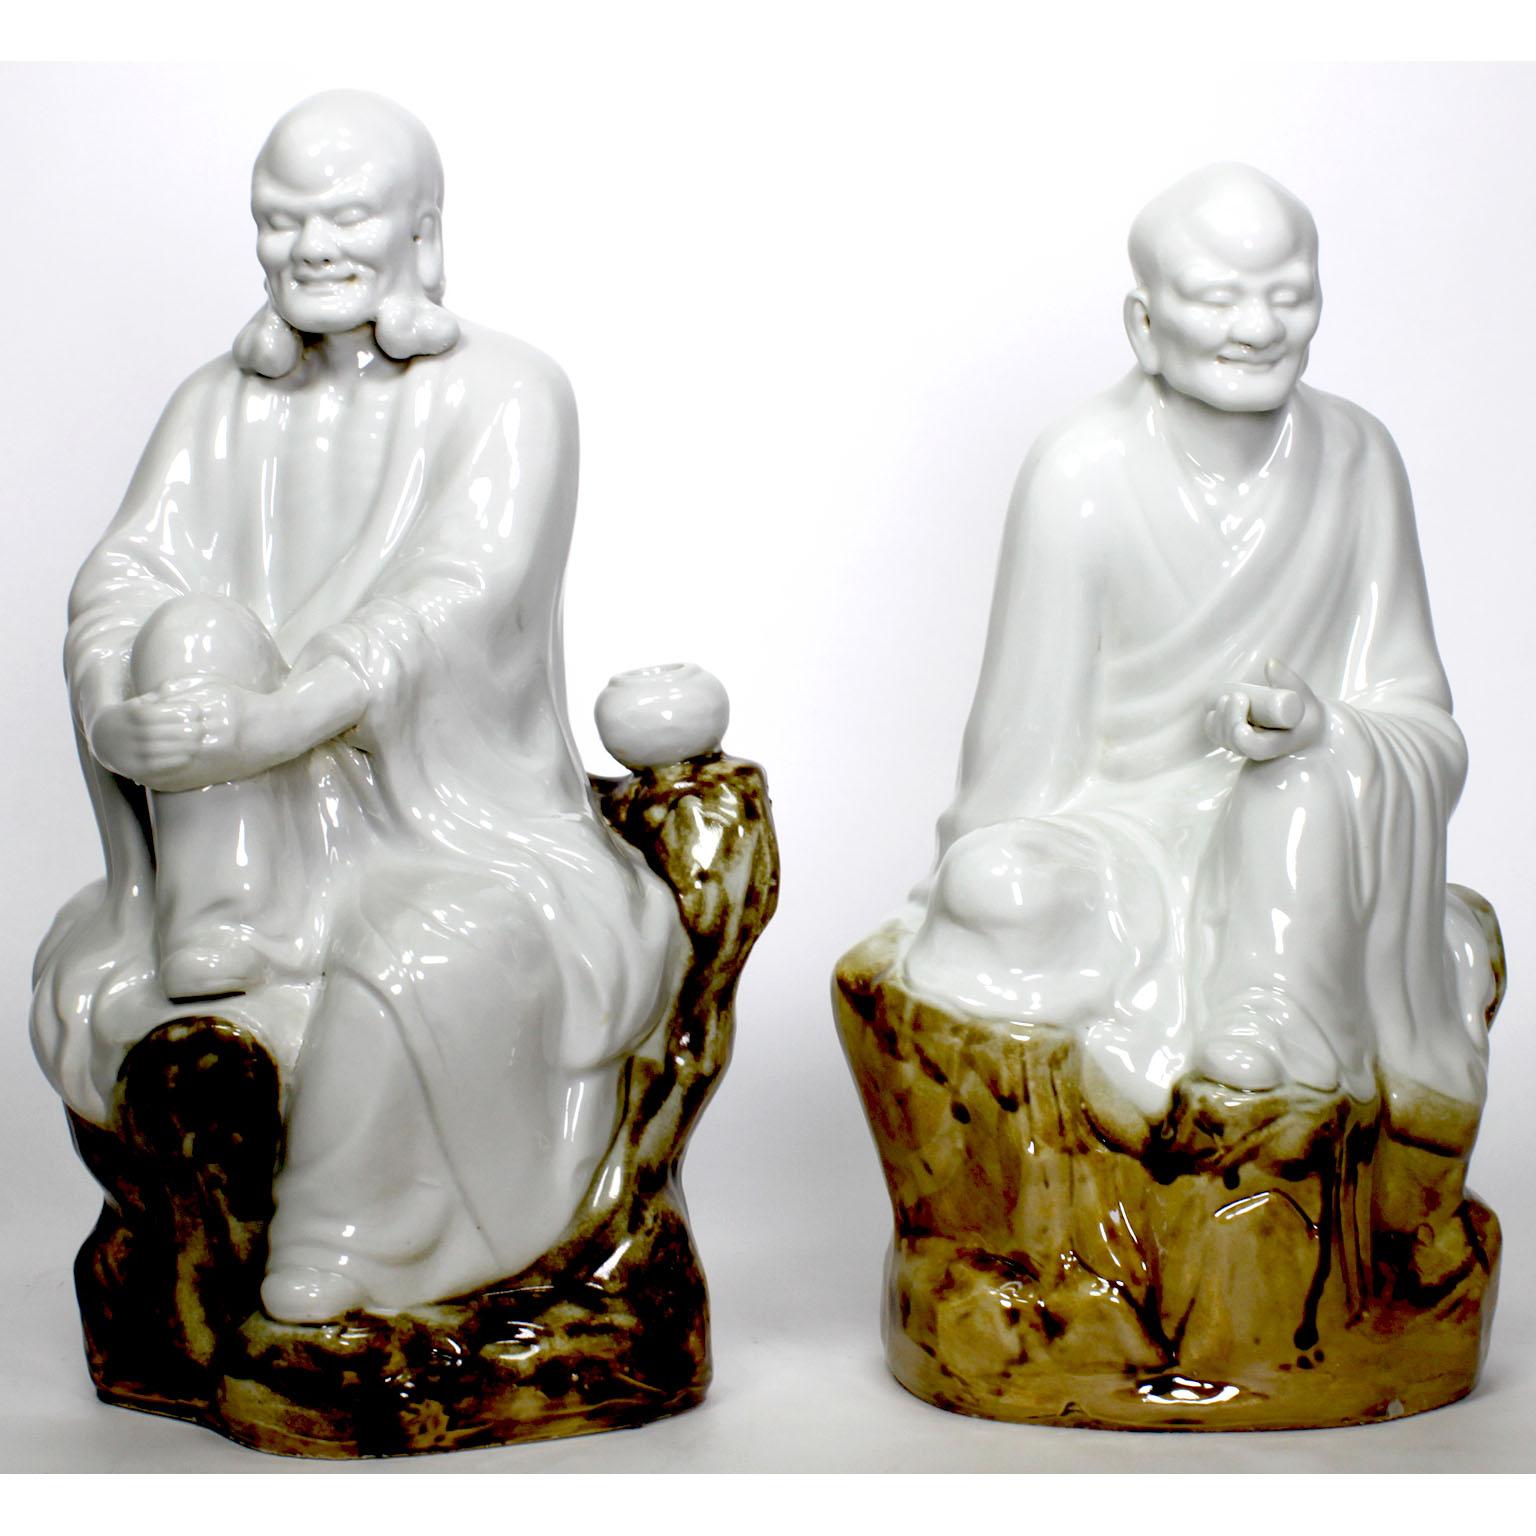 Chinese Set of Eighteen Blanc de Chine Enameled Ceramic Arhats or Luohan Buddhas For Sale 6